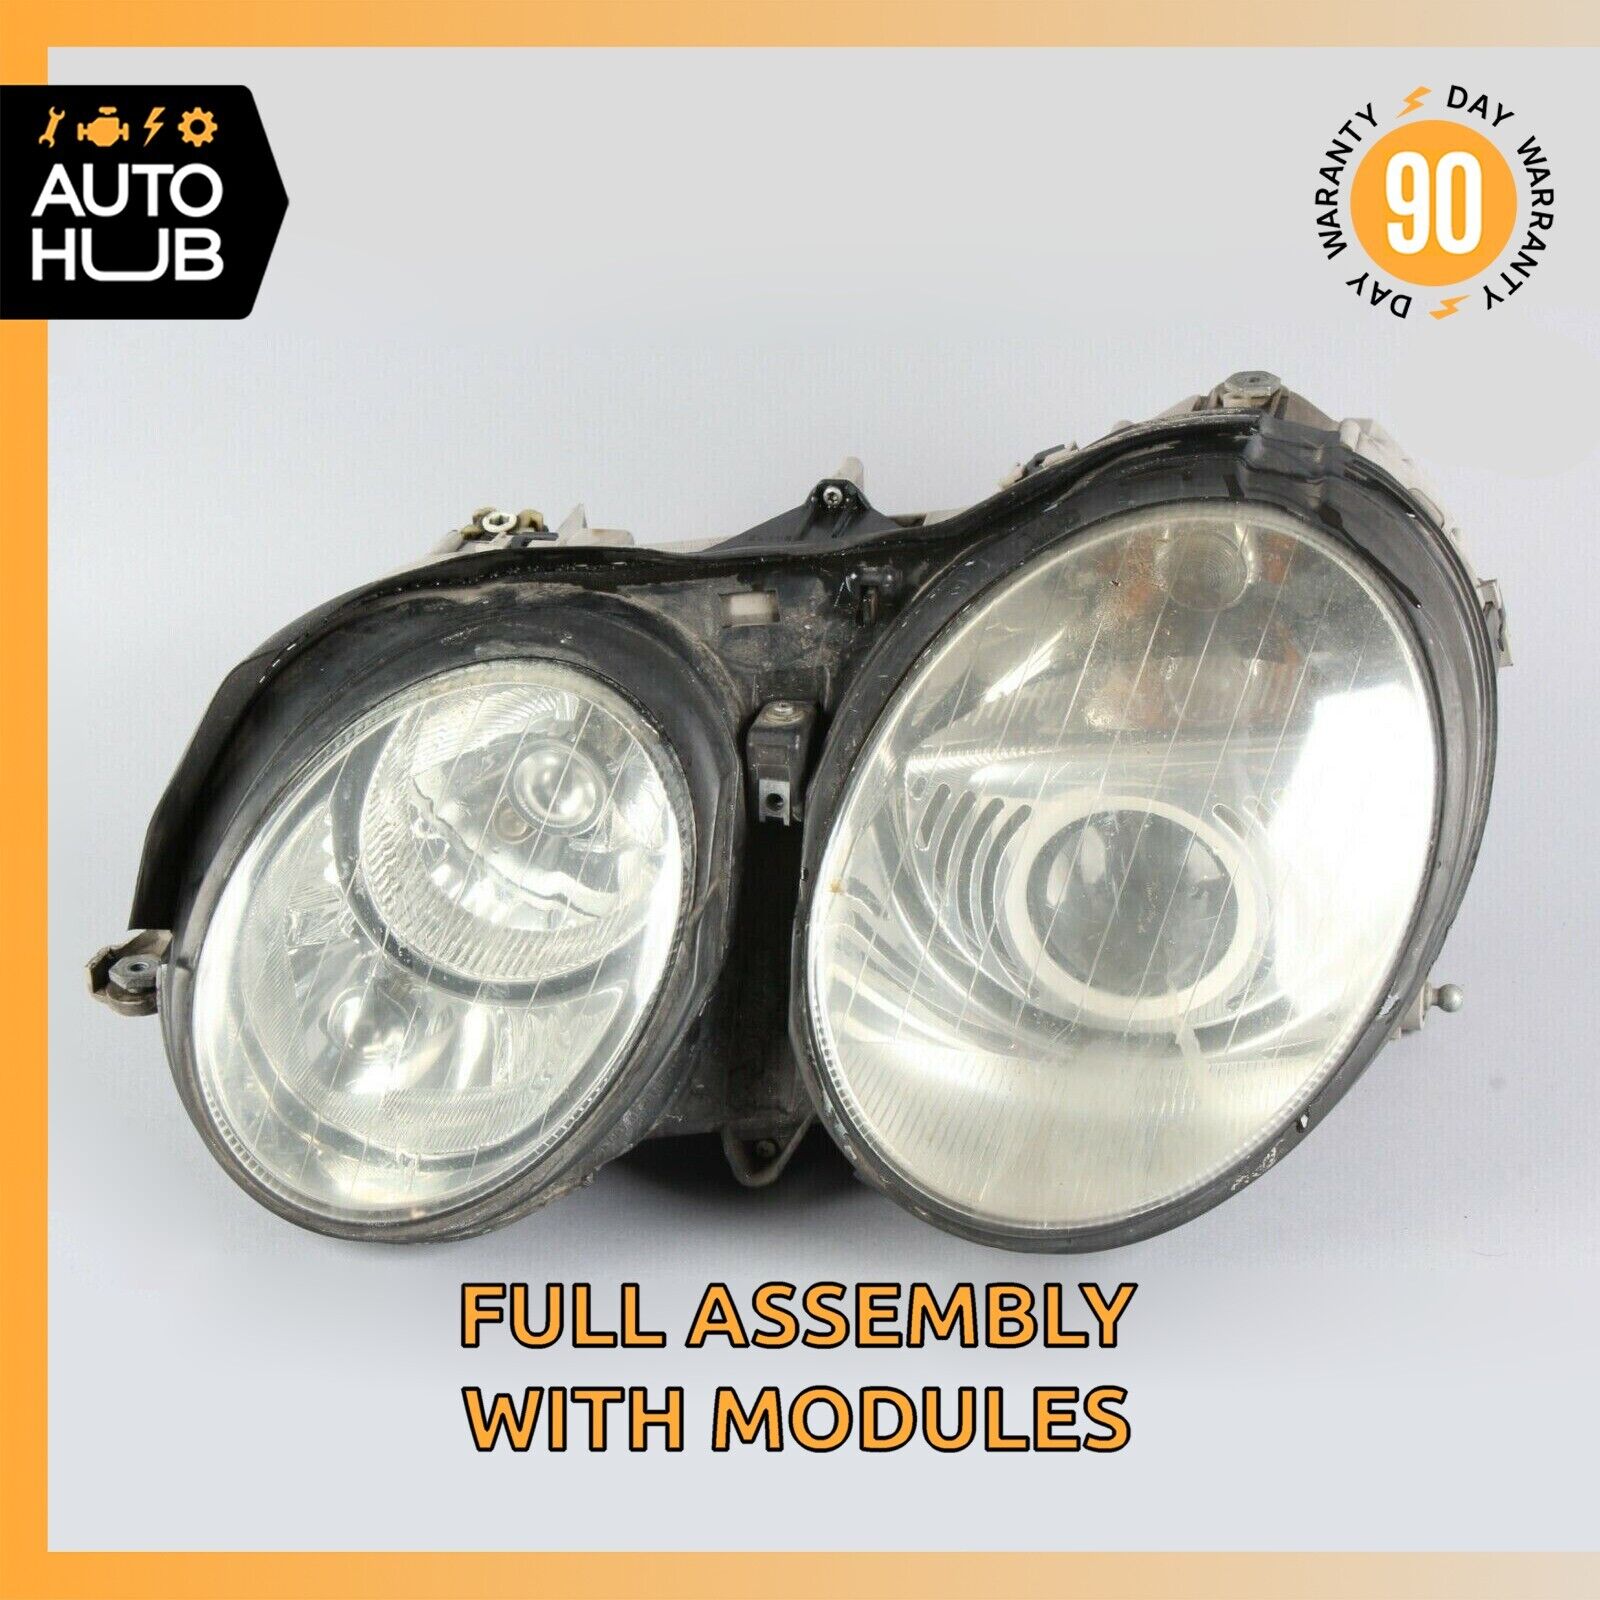 03-06 Mercedes W215 CL500 CL600 CL55 AMG Left Driver Headlight Lamp Xenon OEM